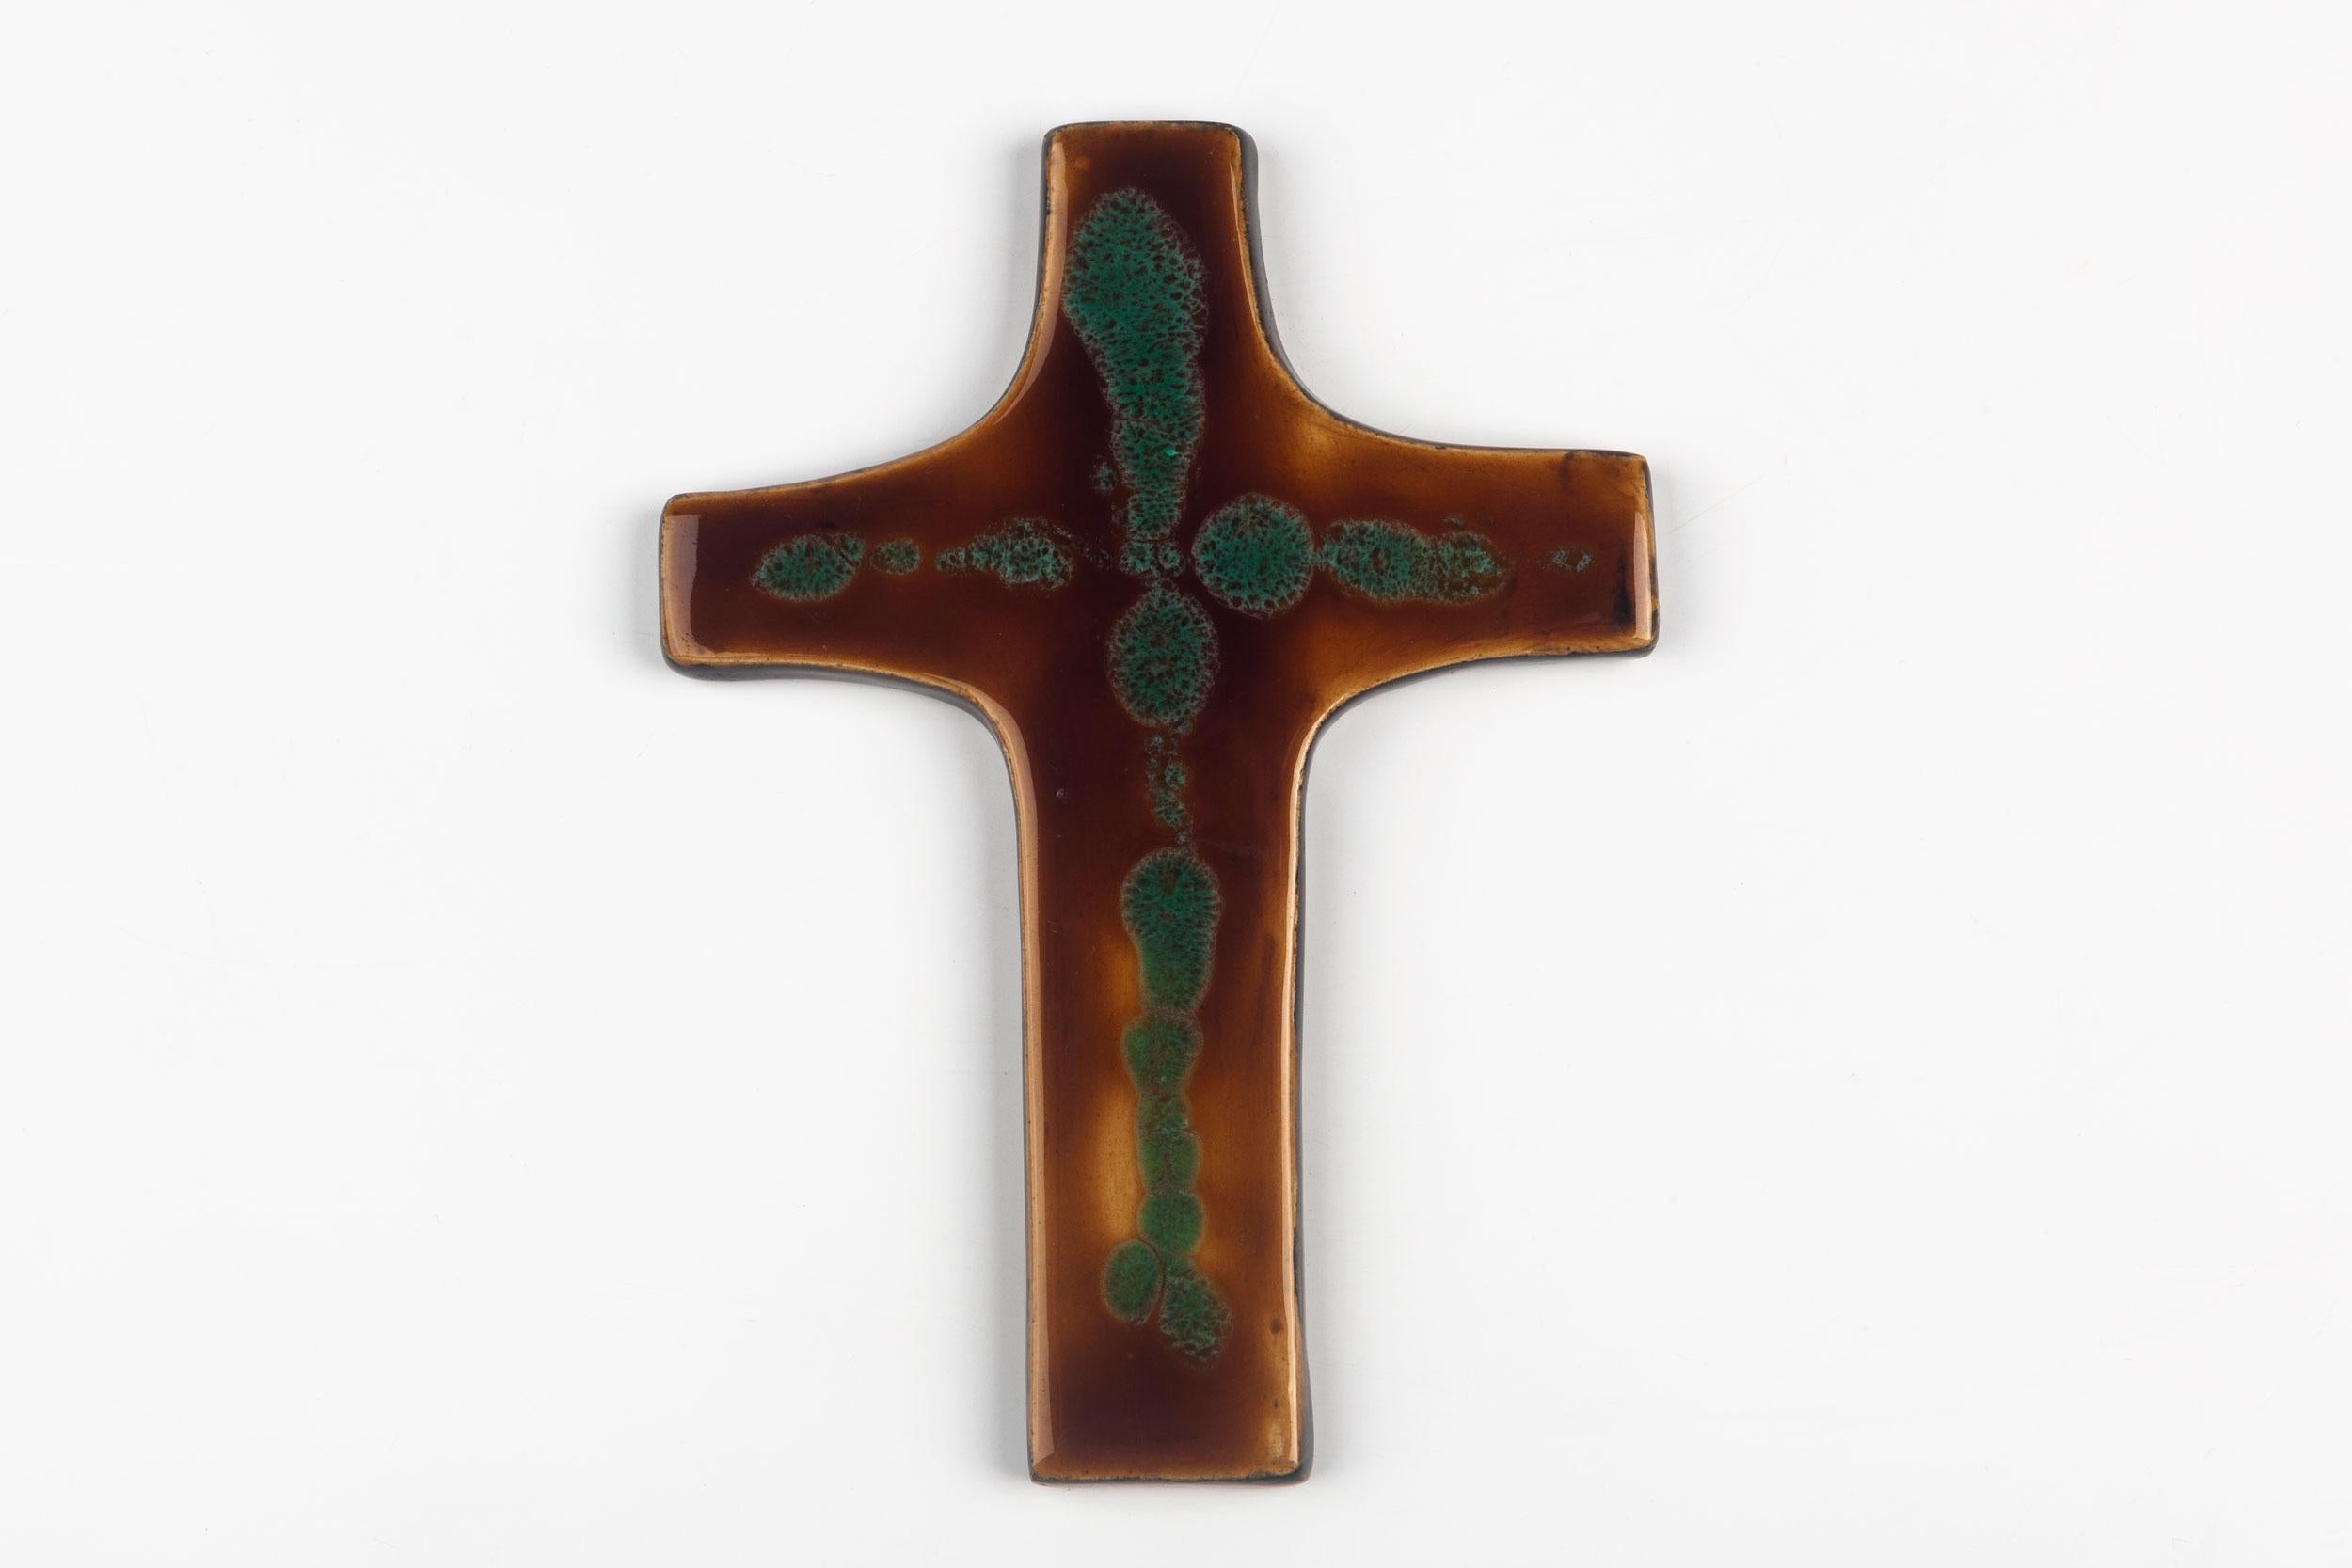 Mid-century European ceramic wall cross in brown and green, with slight texture to the glazed ceramic and a mastery of depth of color. From a large collection of crosses handmade by Flemish artisans.

From modernism to brutalism, the crosses in our